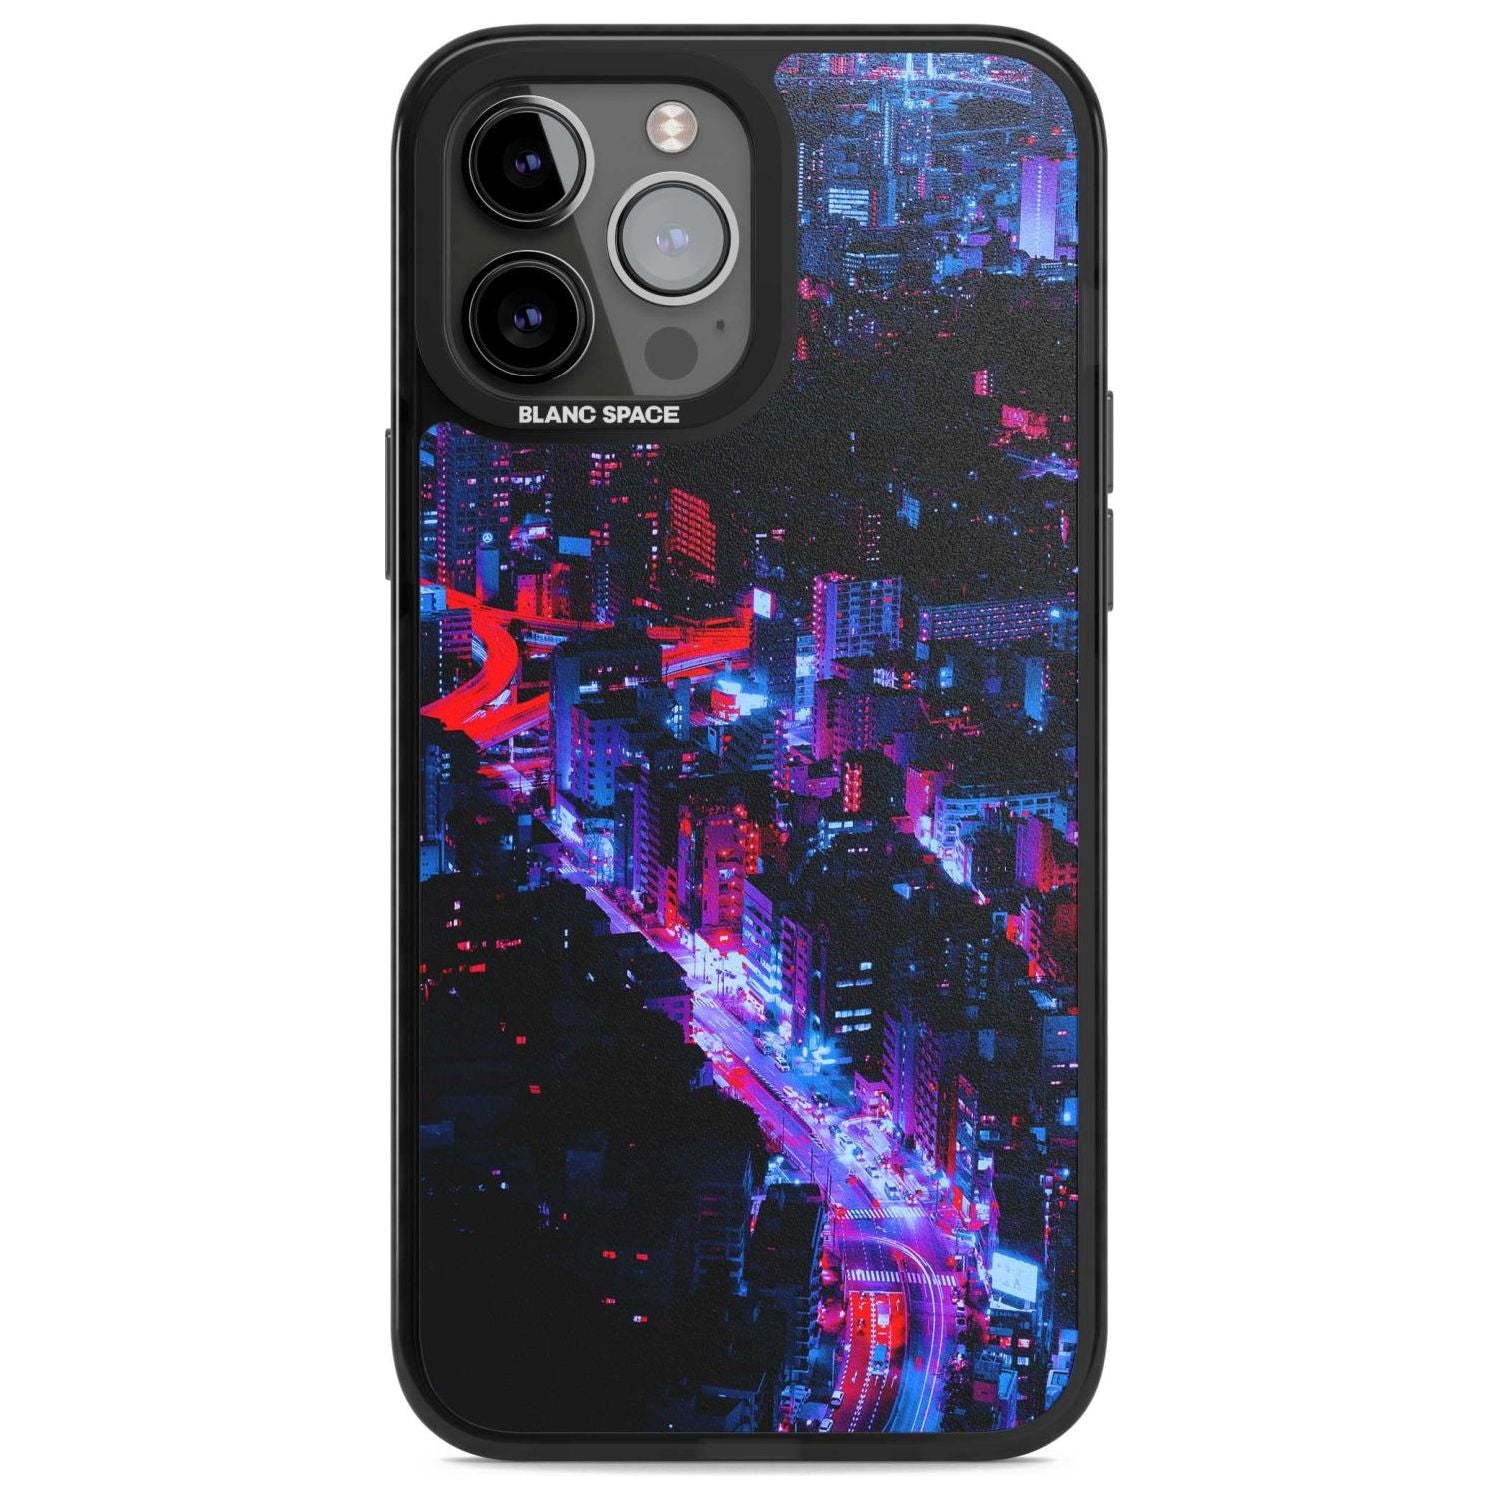 Arial City View - Neon Cities Photographs Phone Case iPhone 13 Pro Max / Magsafe Black Impact Case Blanc Space